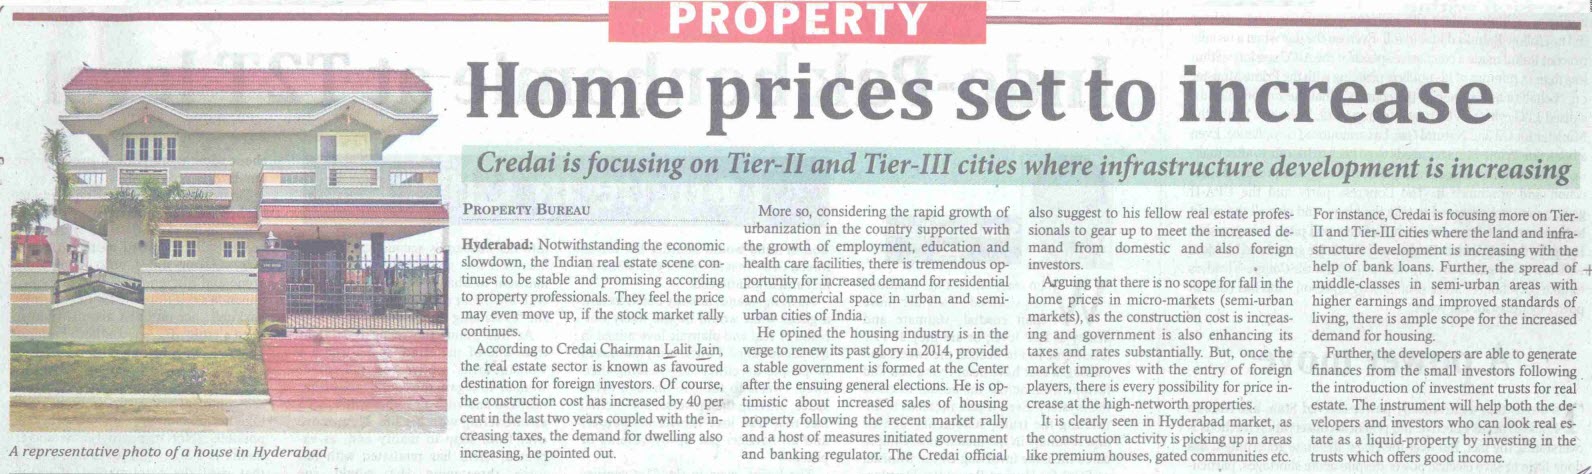 Home prices set to increase